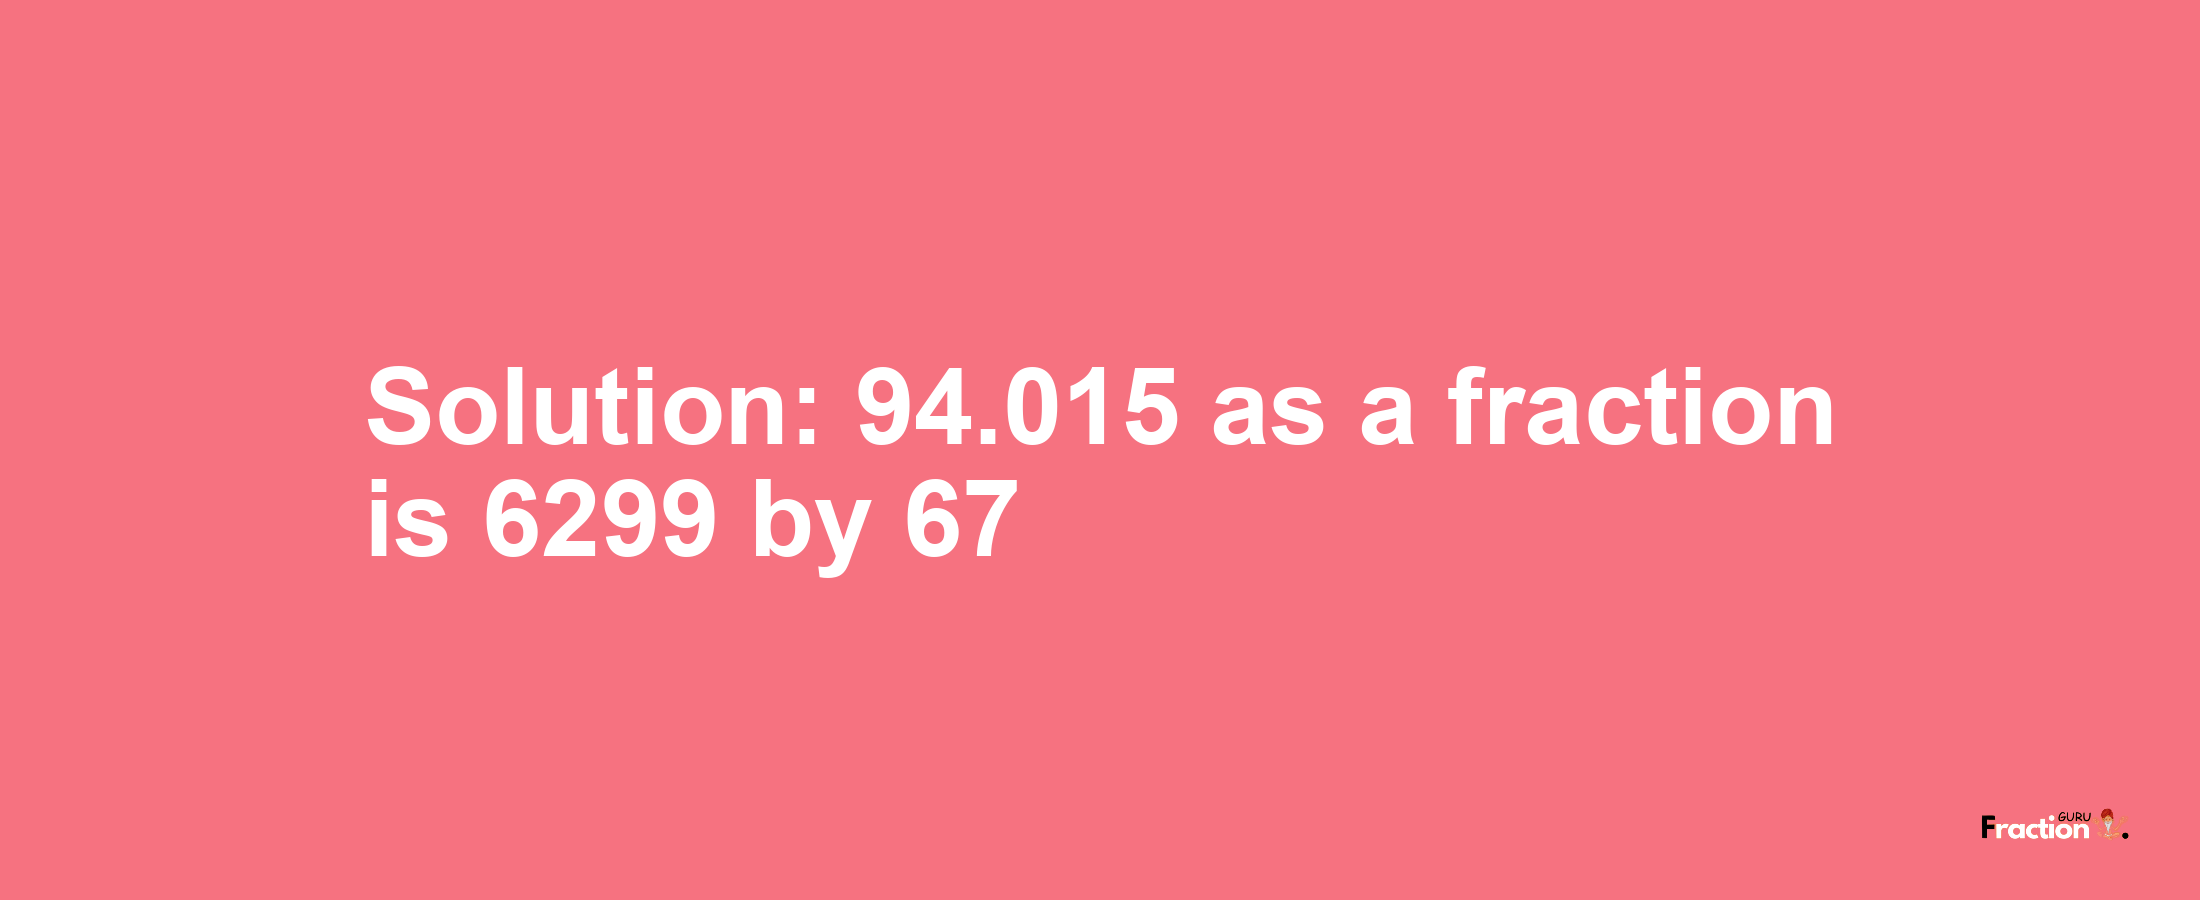 Solution:94.015 as a fraction is 6299/67